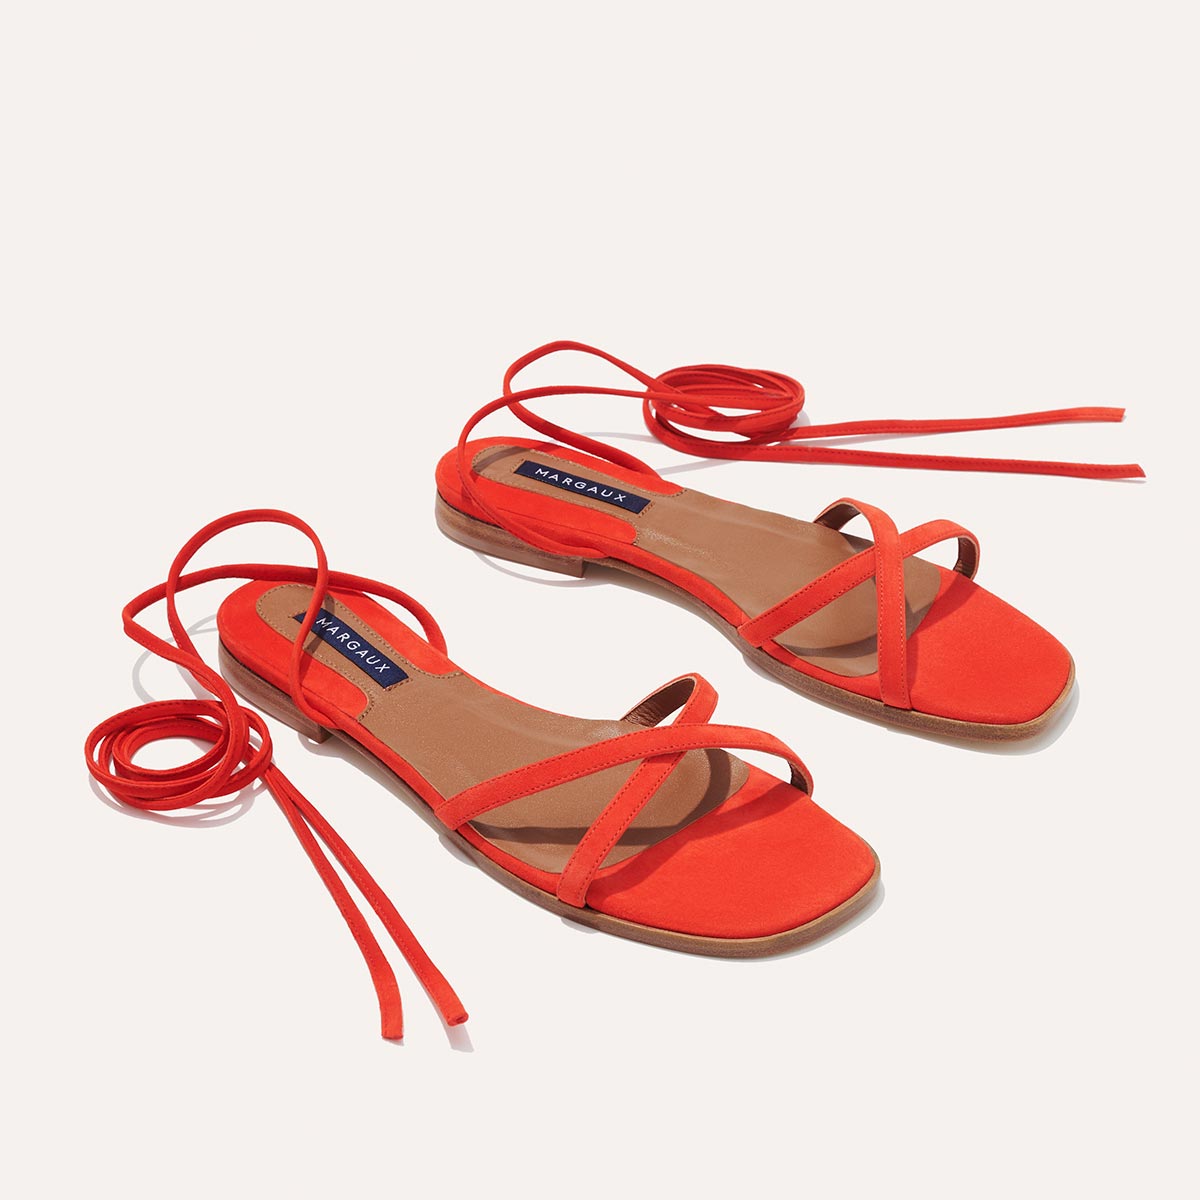 The Wrap Sandal - Chili Suede